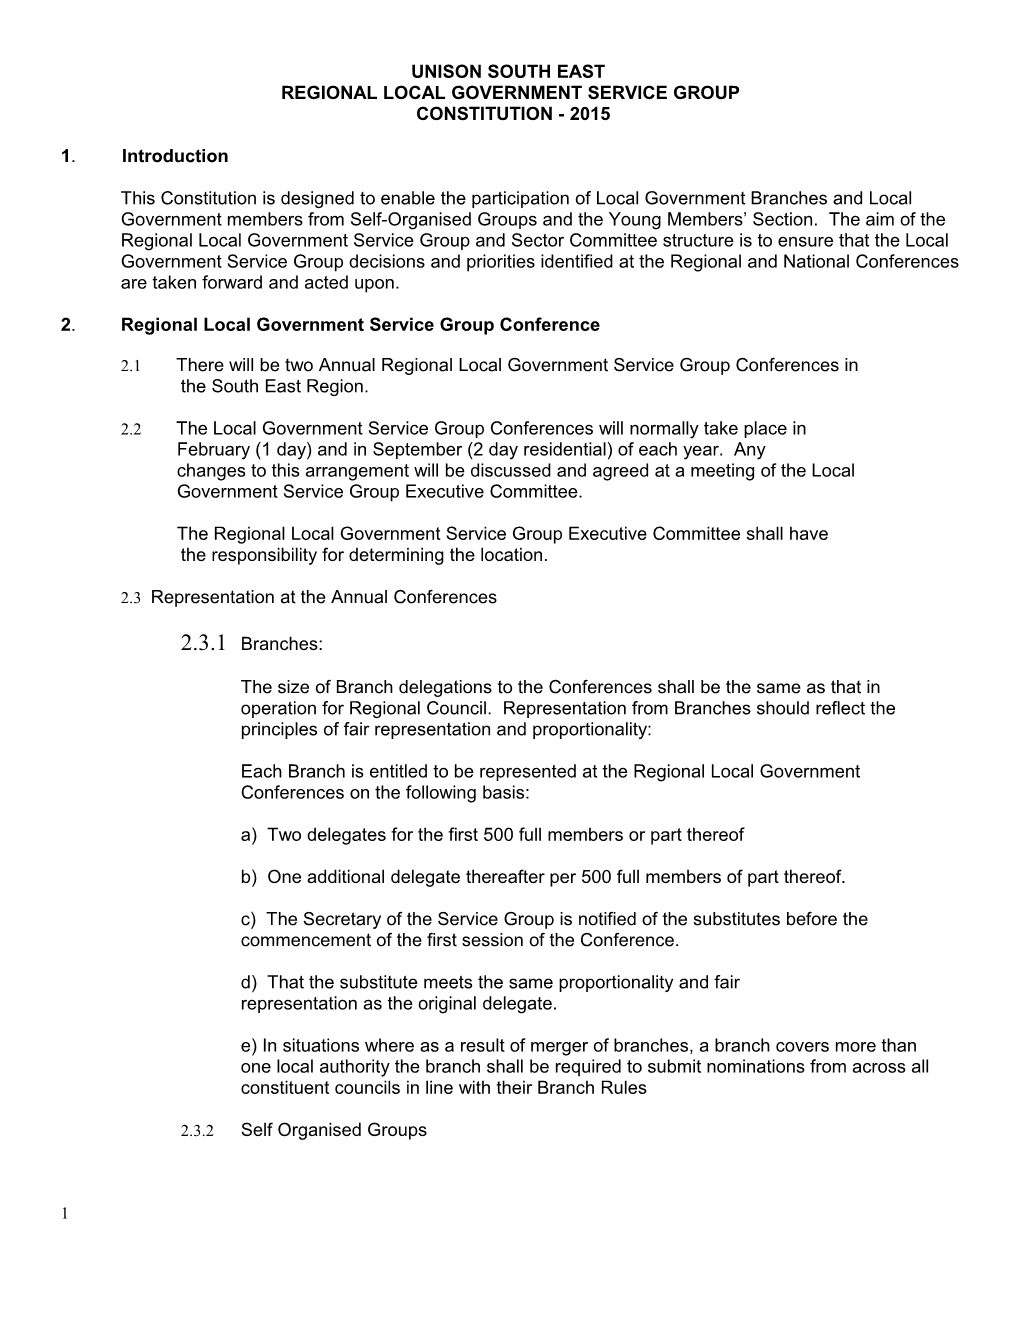 South East Local Government Committee Constitution 2015